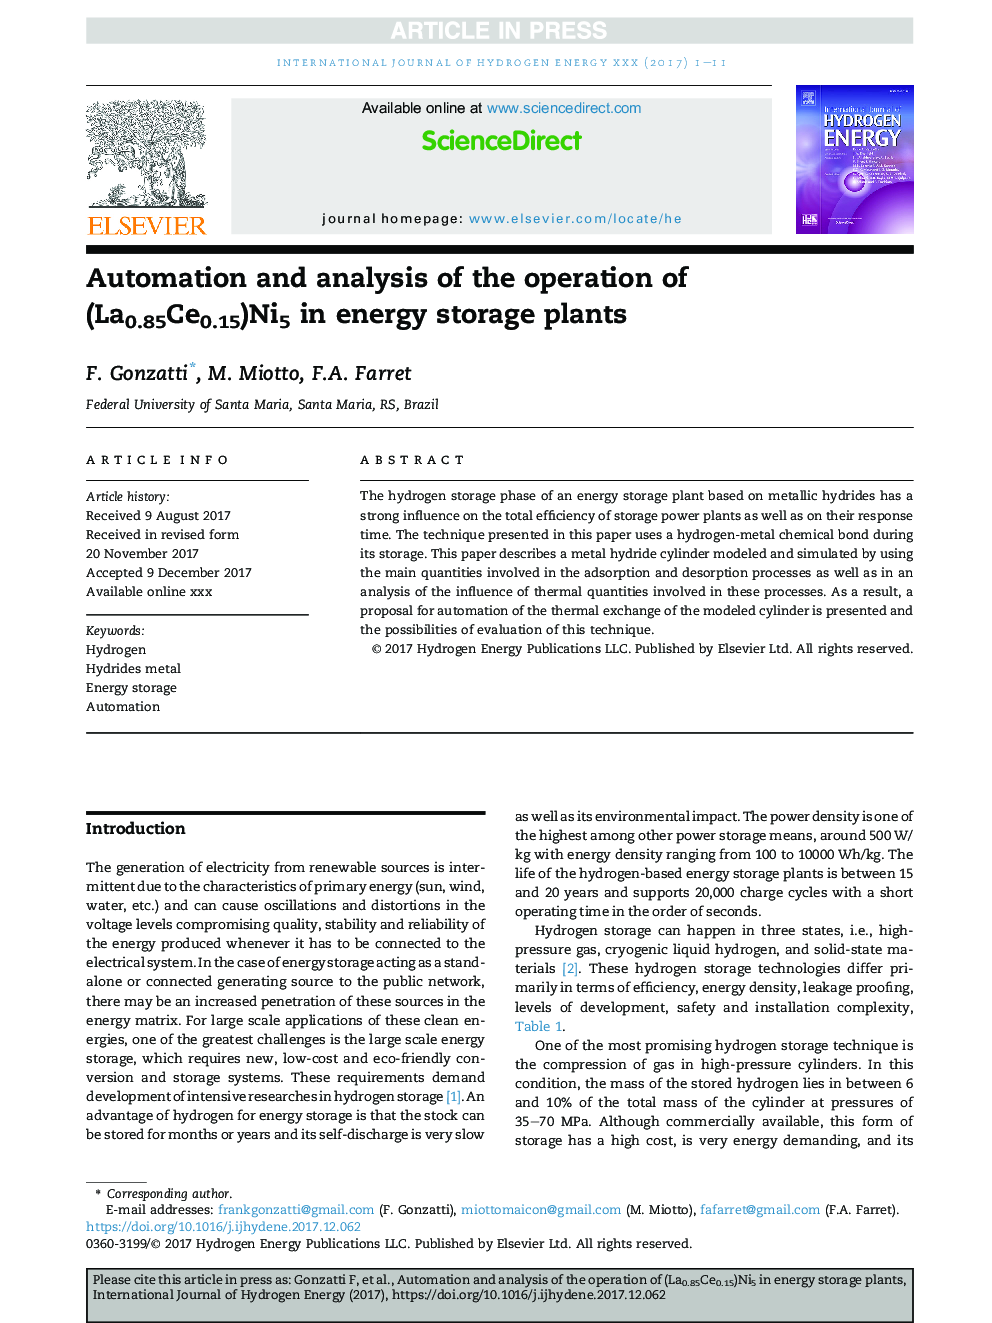 Automation and analysis of the operation of (La0.85Ce0.15)Ni5 in energy storage plants